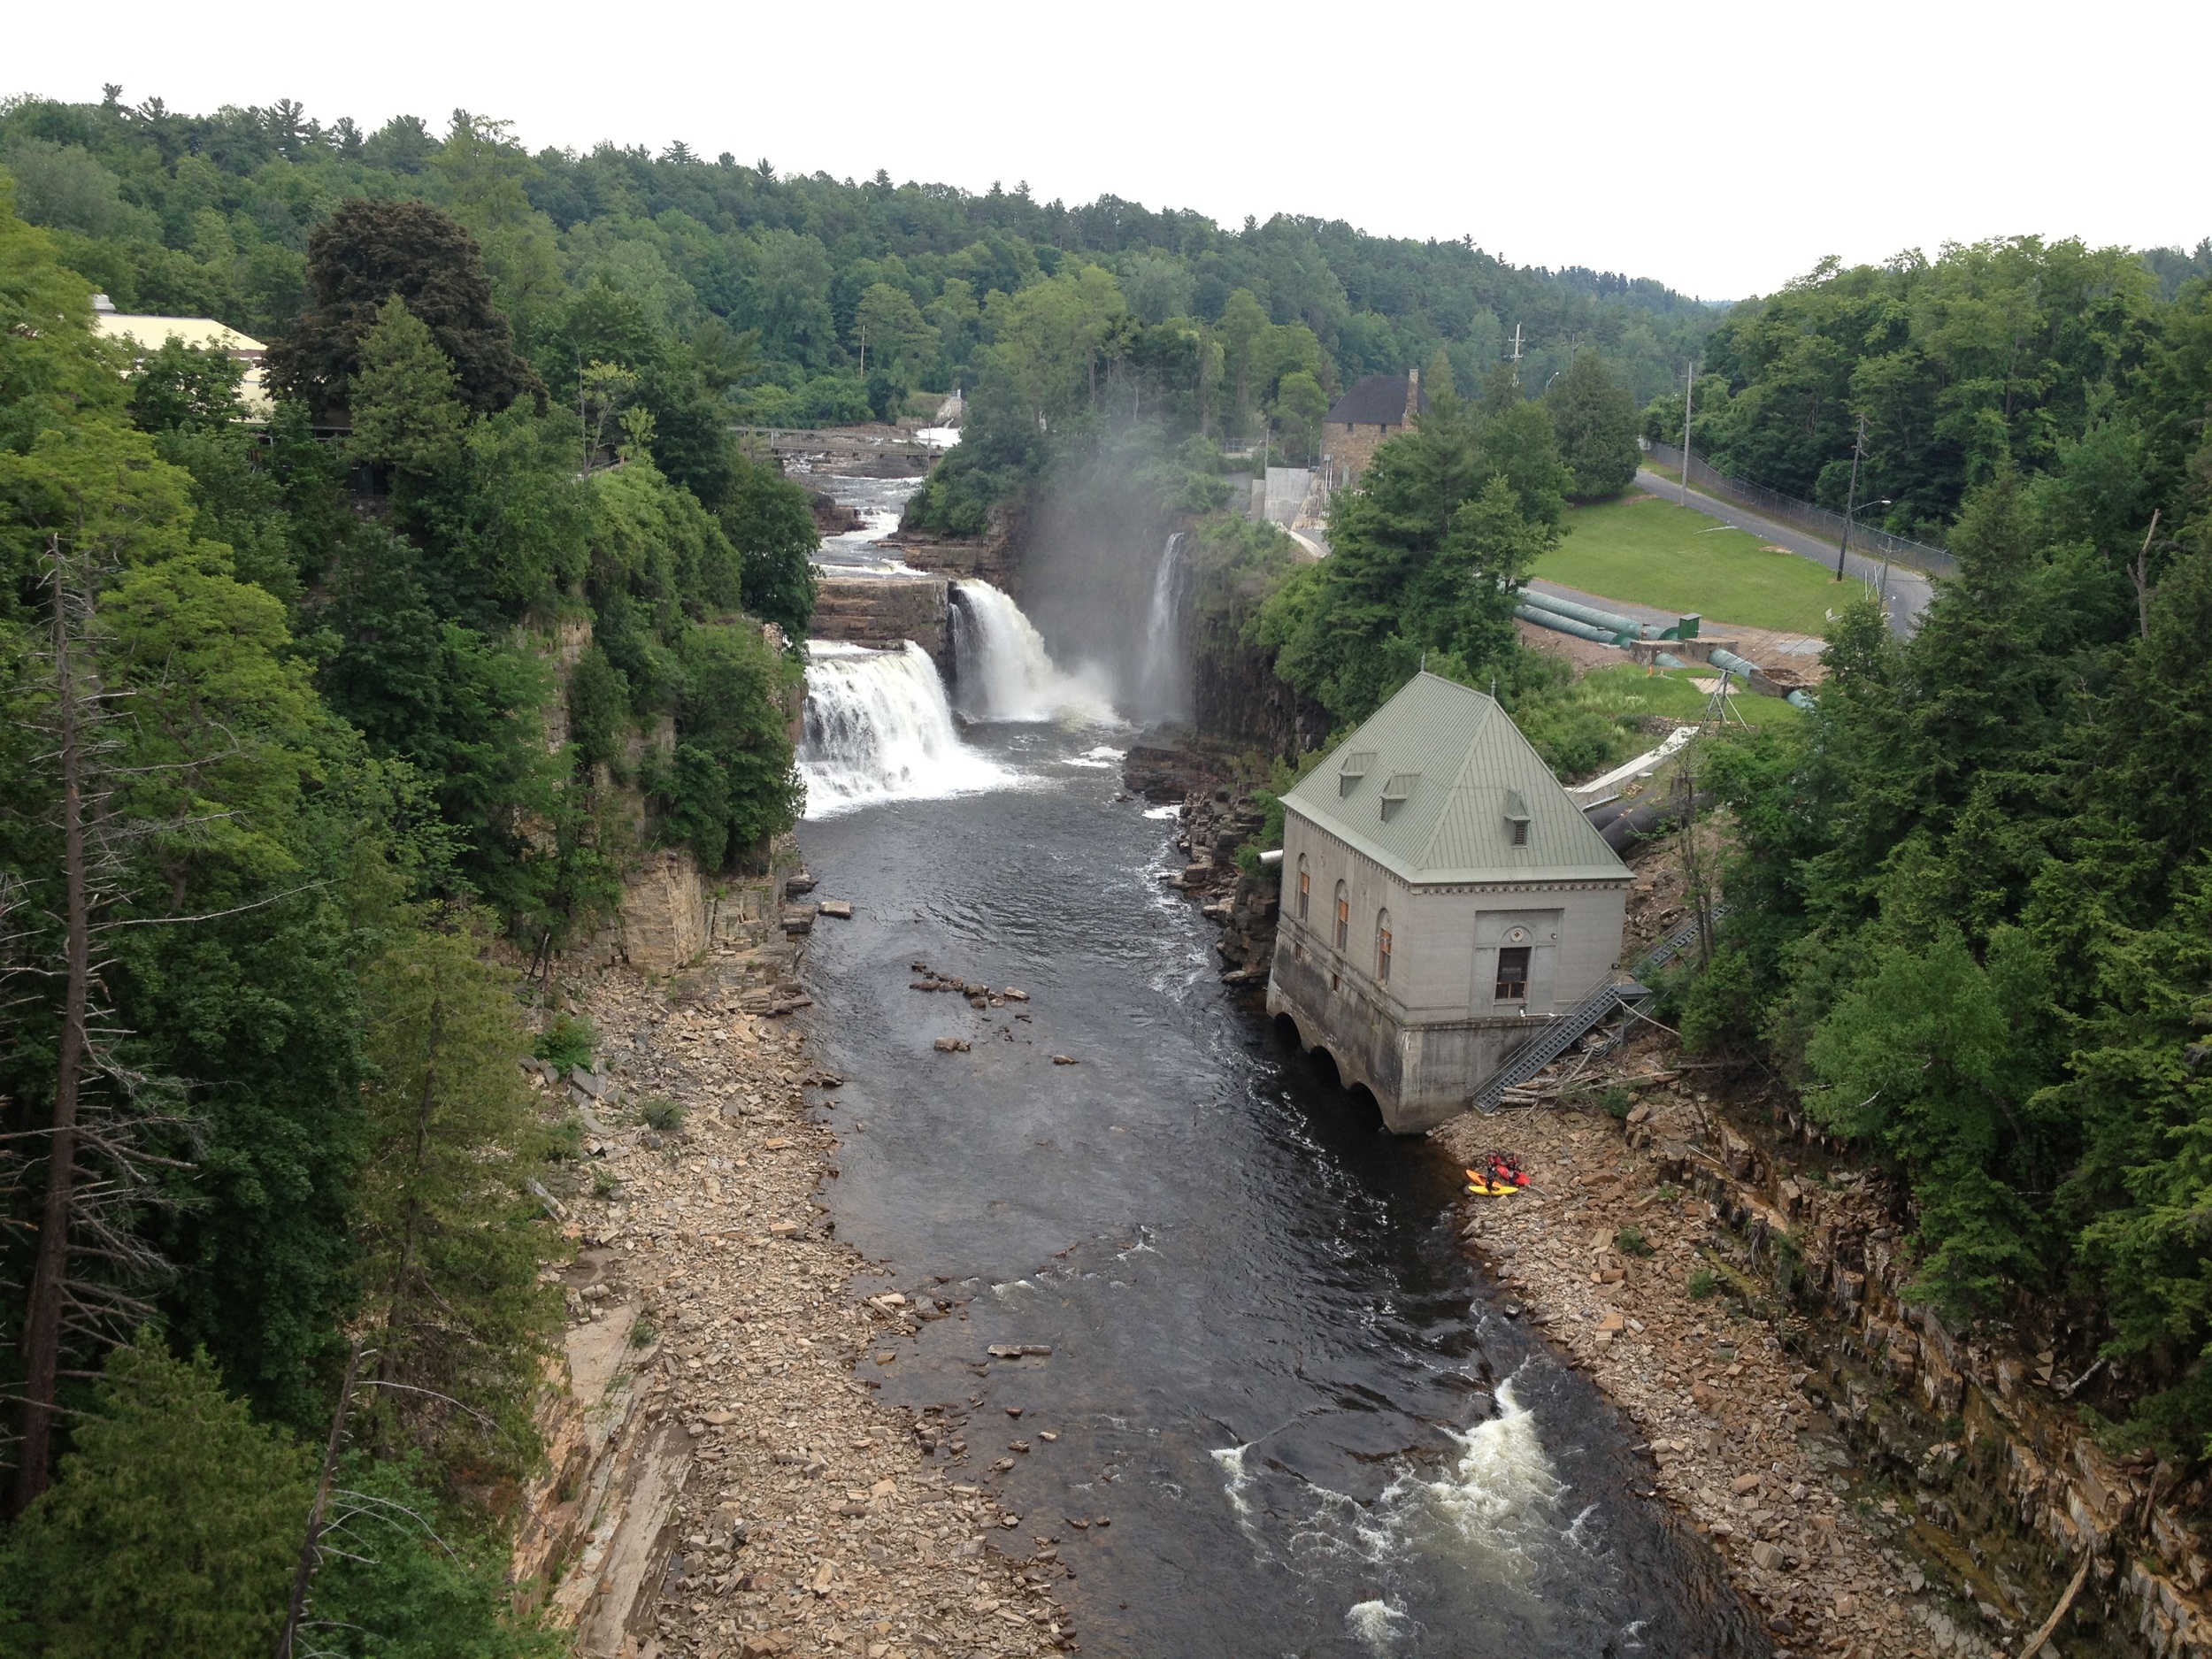  The stunning Ausable Chasm, just down the Ausable River from Keeseville. That red and yellow dot is three kayaks getting ready to lauch, and I watched them paddle upstream to the base of the falls, then take some great rapids just below the bridge. 